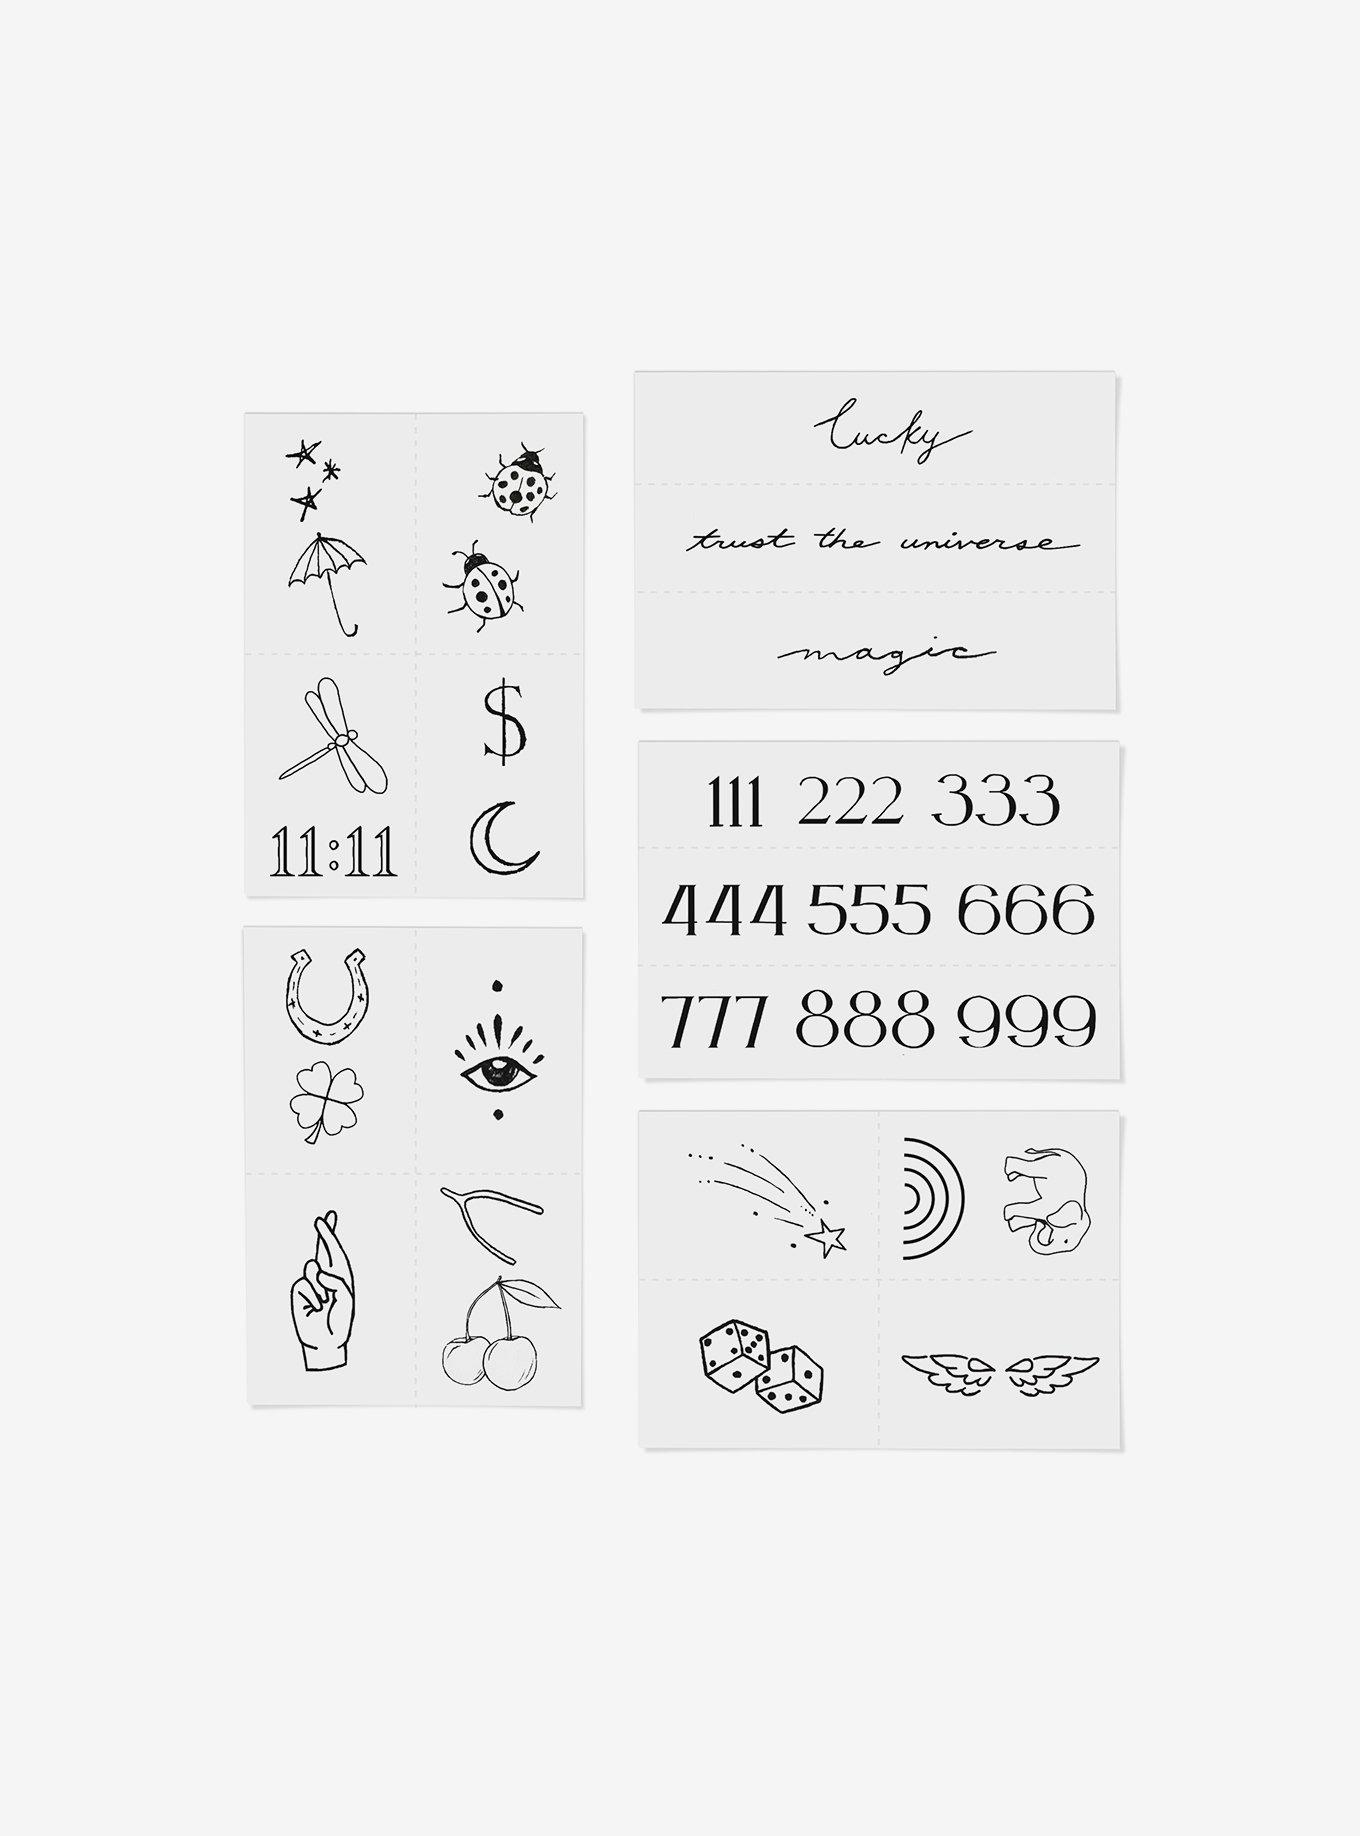 INKED By Dani Lucky Girl Temporary Tattoo Set